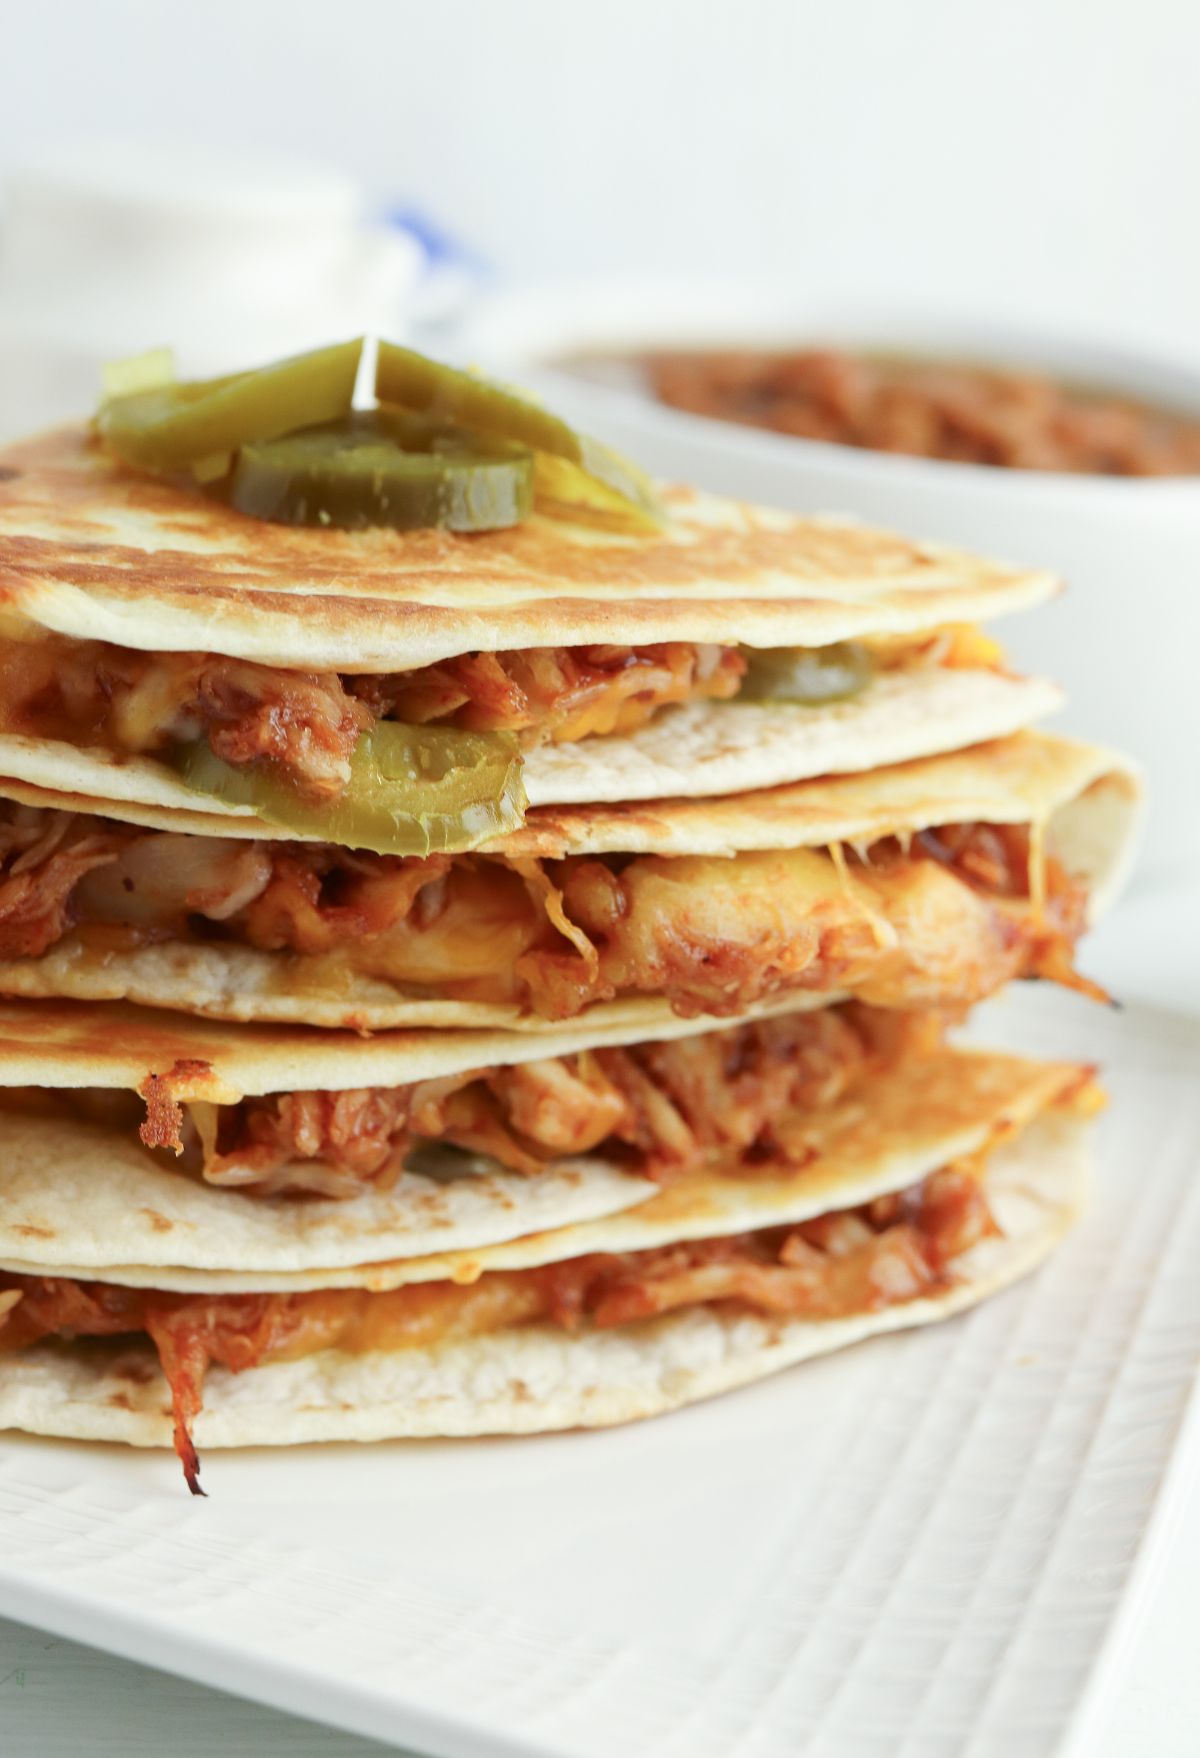 Stack of quesadillas filled with cheese and shredded chicken, topped with pickled jalapeños on a white plate.